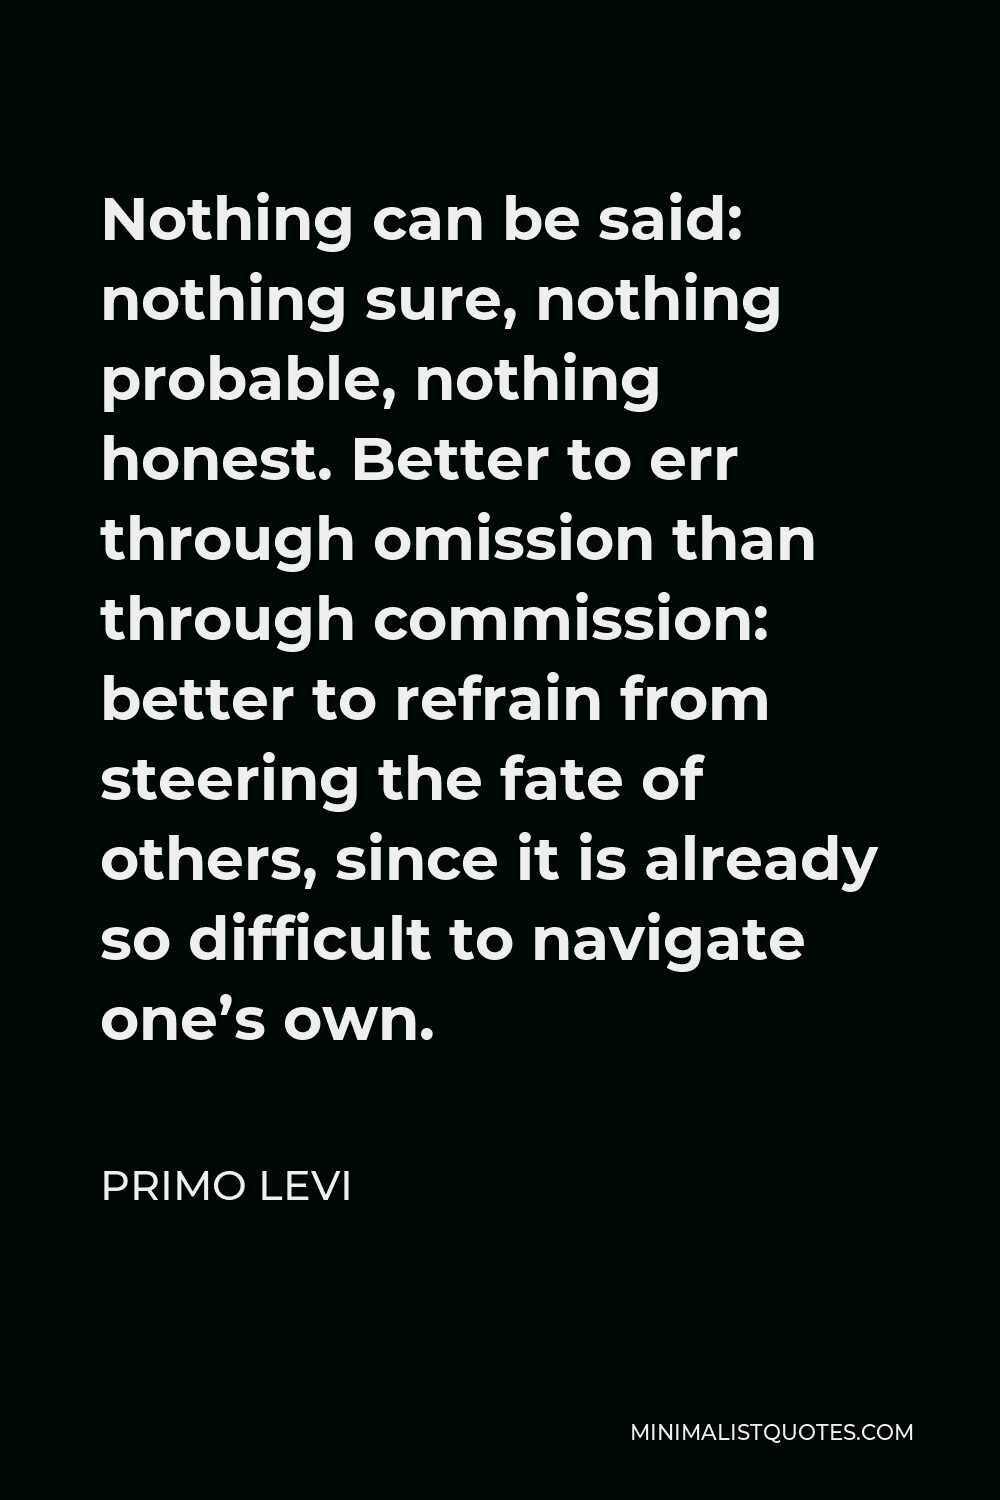 Primo Levi Quote - Nothing can be said: nothing sure, nothing probable, nothing honest. Better to err through omission than through commission: better to refrain from steering the fate of others, since it is already so difficult to navigate one’s own.